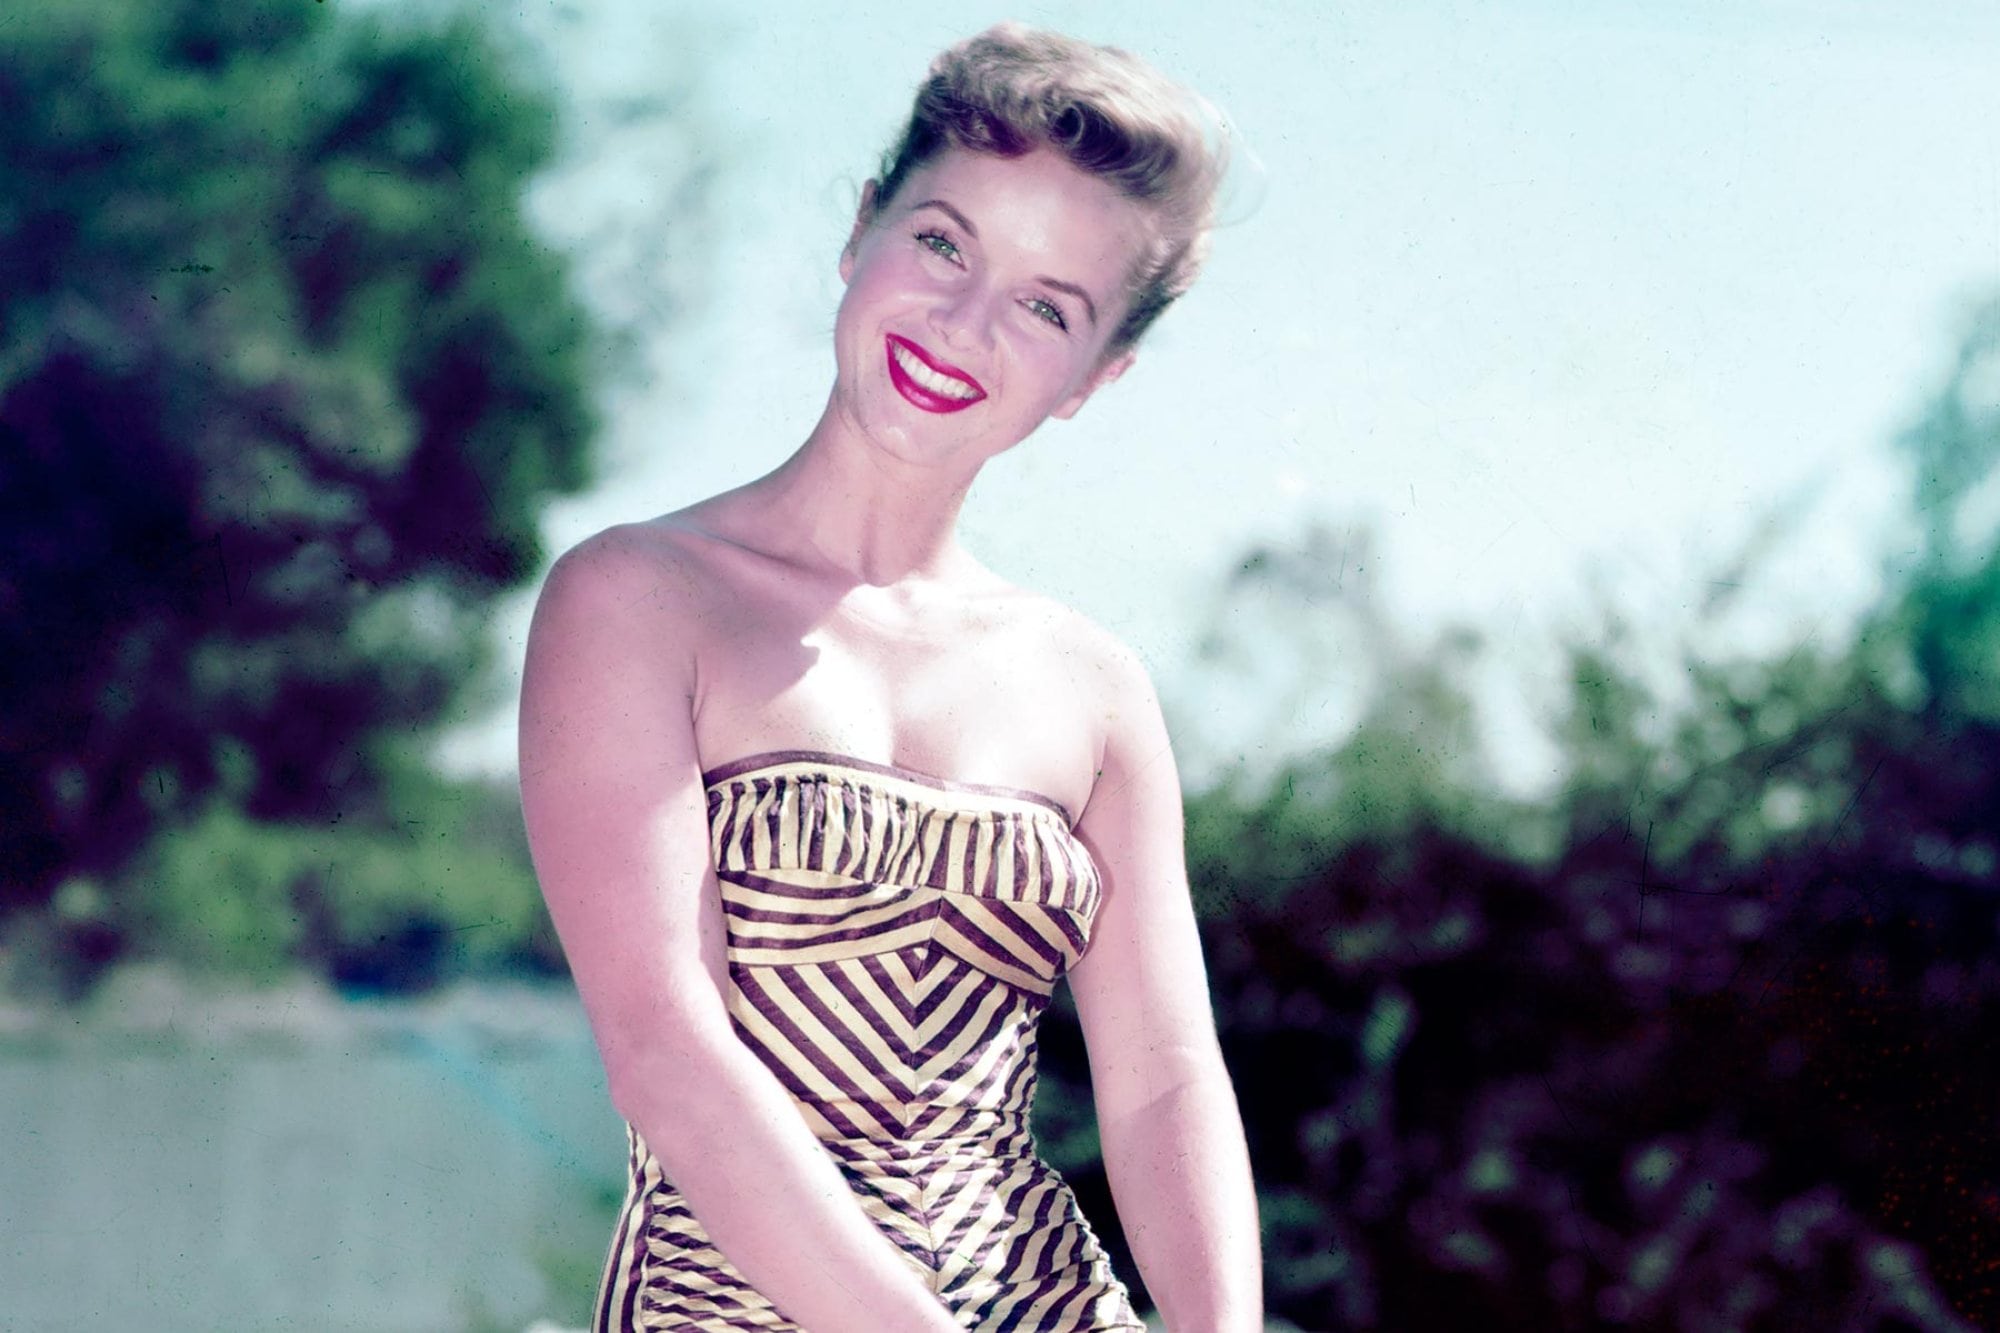 Debbie Reynolds, US actress, singer and dancer, smiling while wearing a swimsuit, sitting beside a swimming pool, circa 1955. (Photo by Silver Screen Collection/Getty Images)